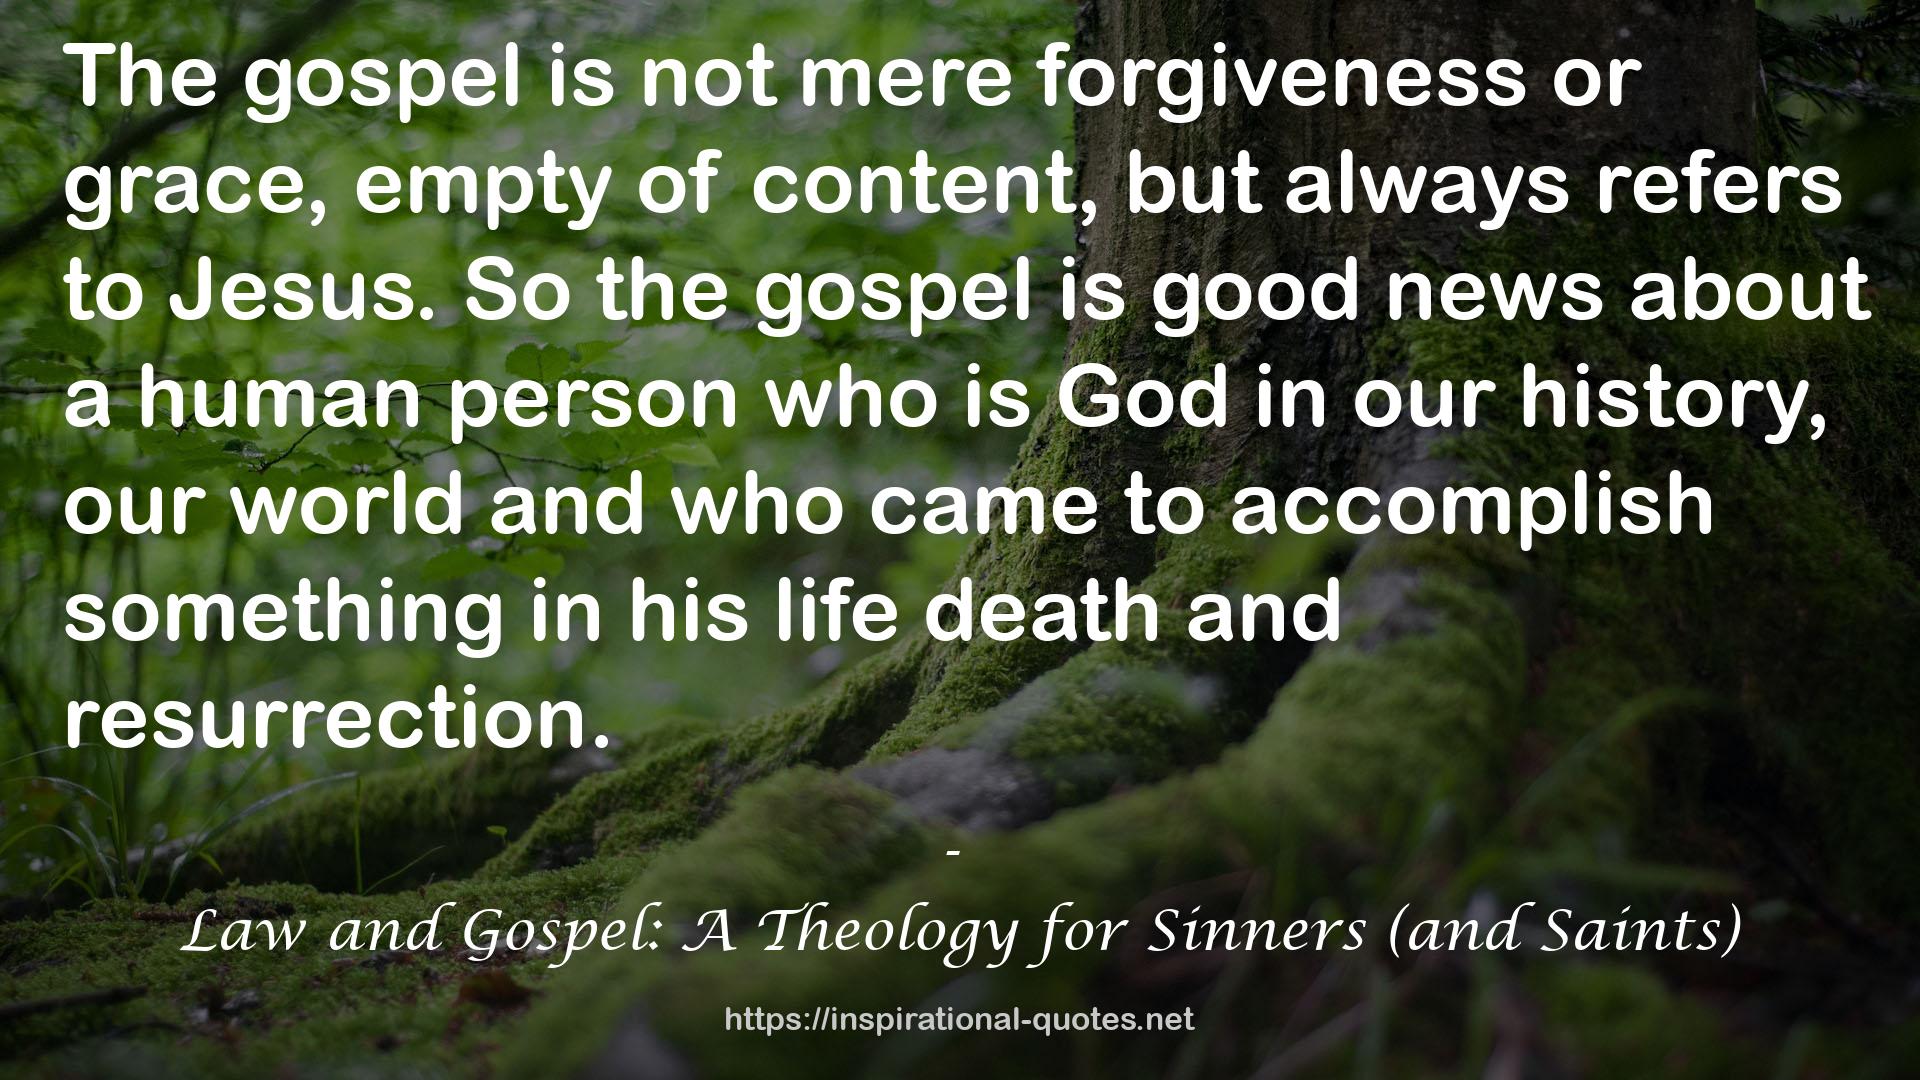 Law and Gospel: A Theology for Sinners (and Saints) QUOTES